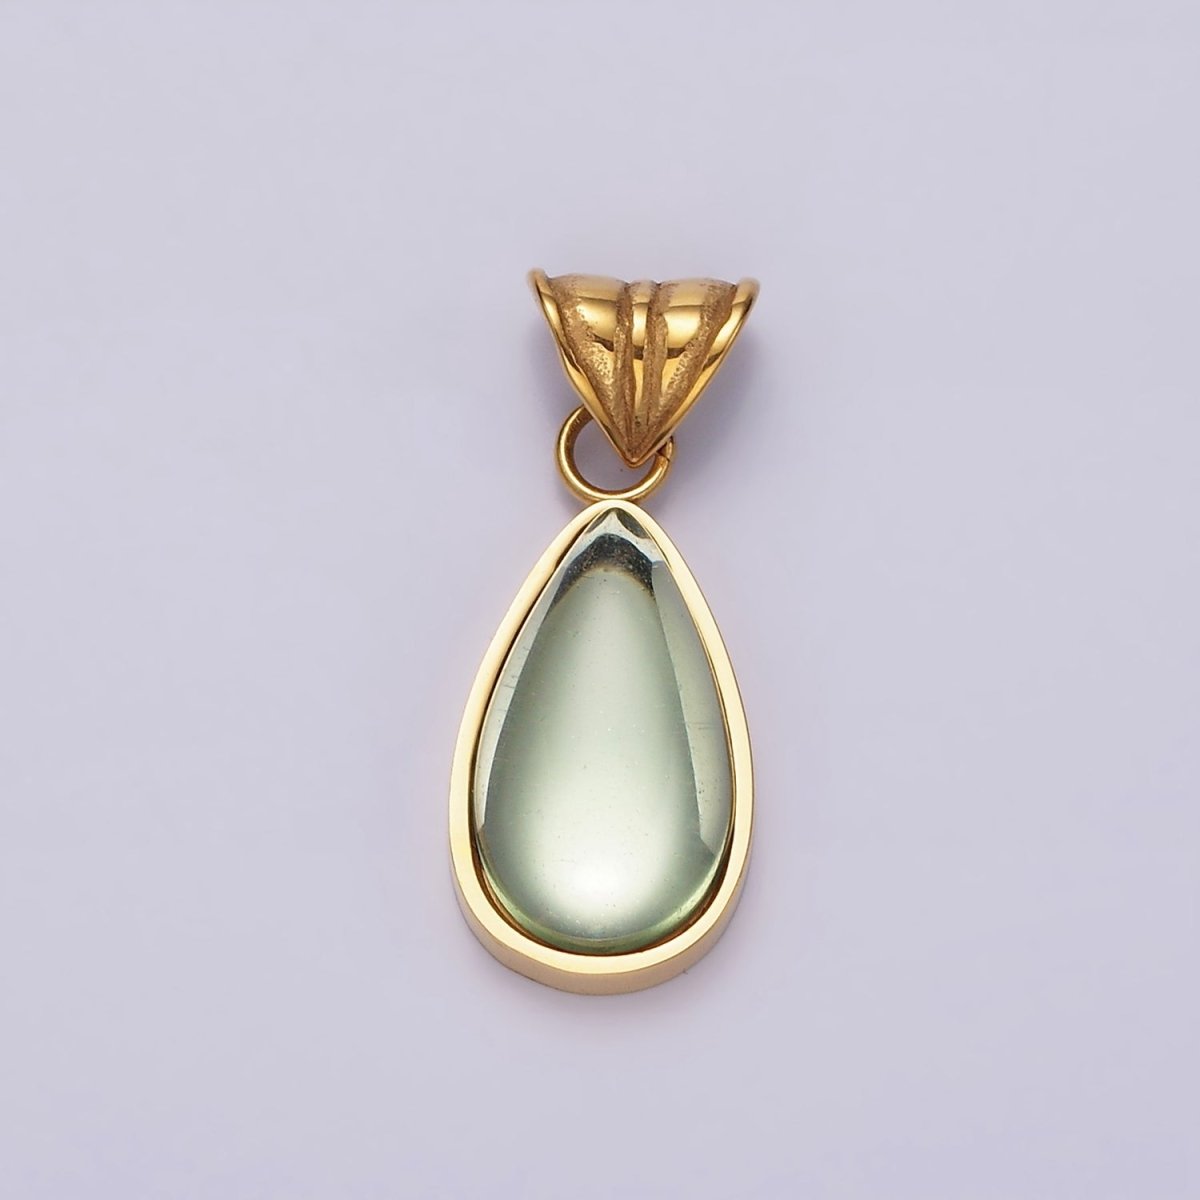 Stainless Steel Gold Tear Drop Green Charm Pear Pendant Charm for Necklace Bracelet Drop Jewelry | P-834 - DLUXCA